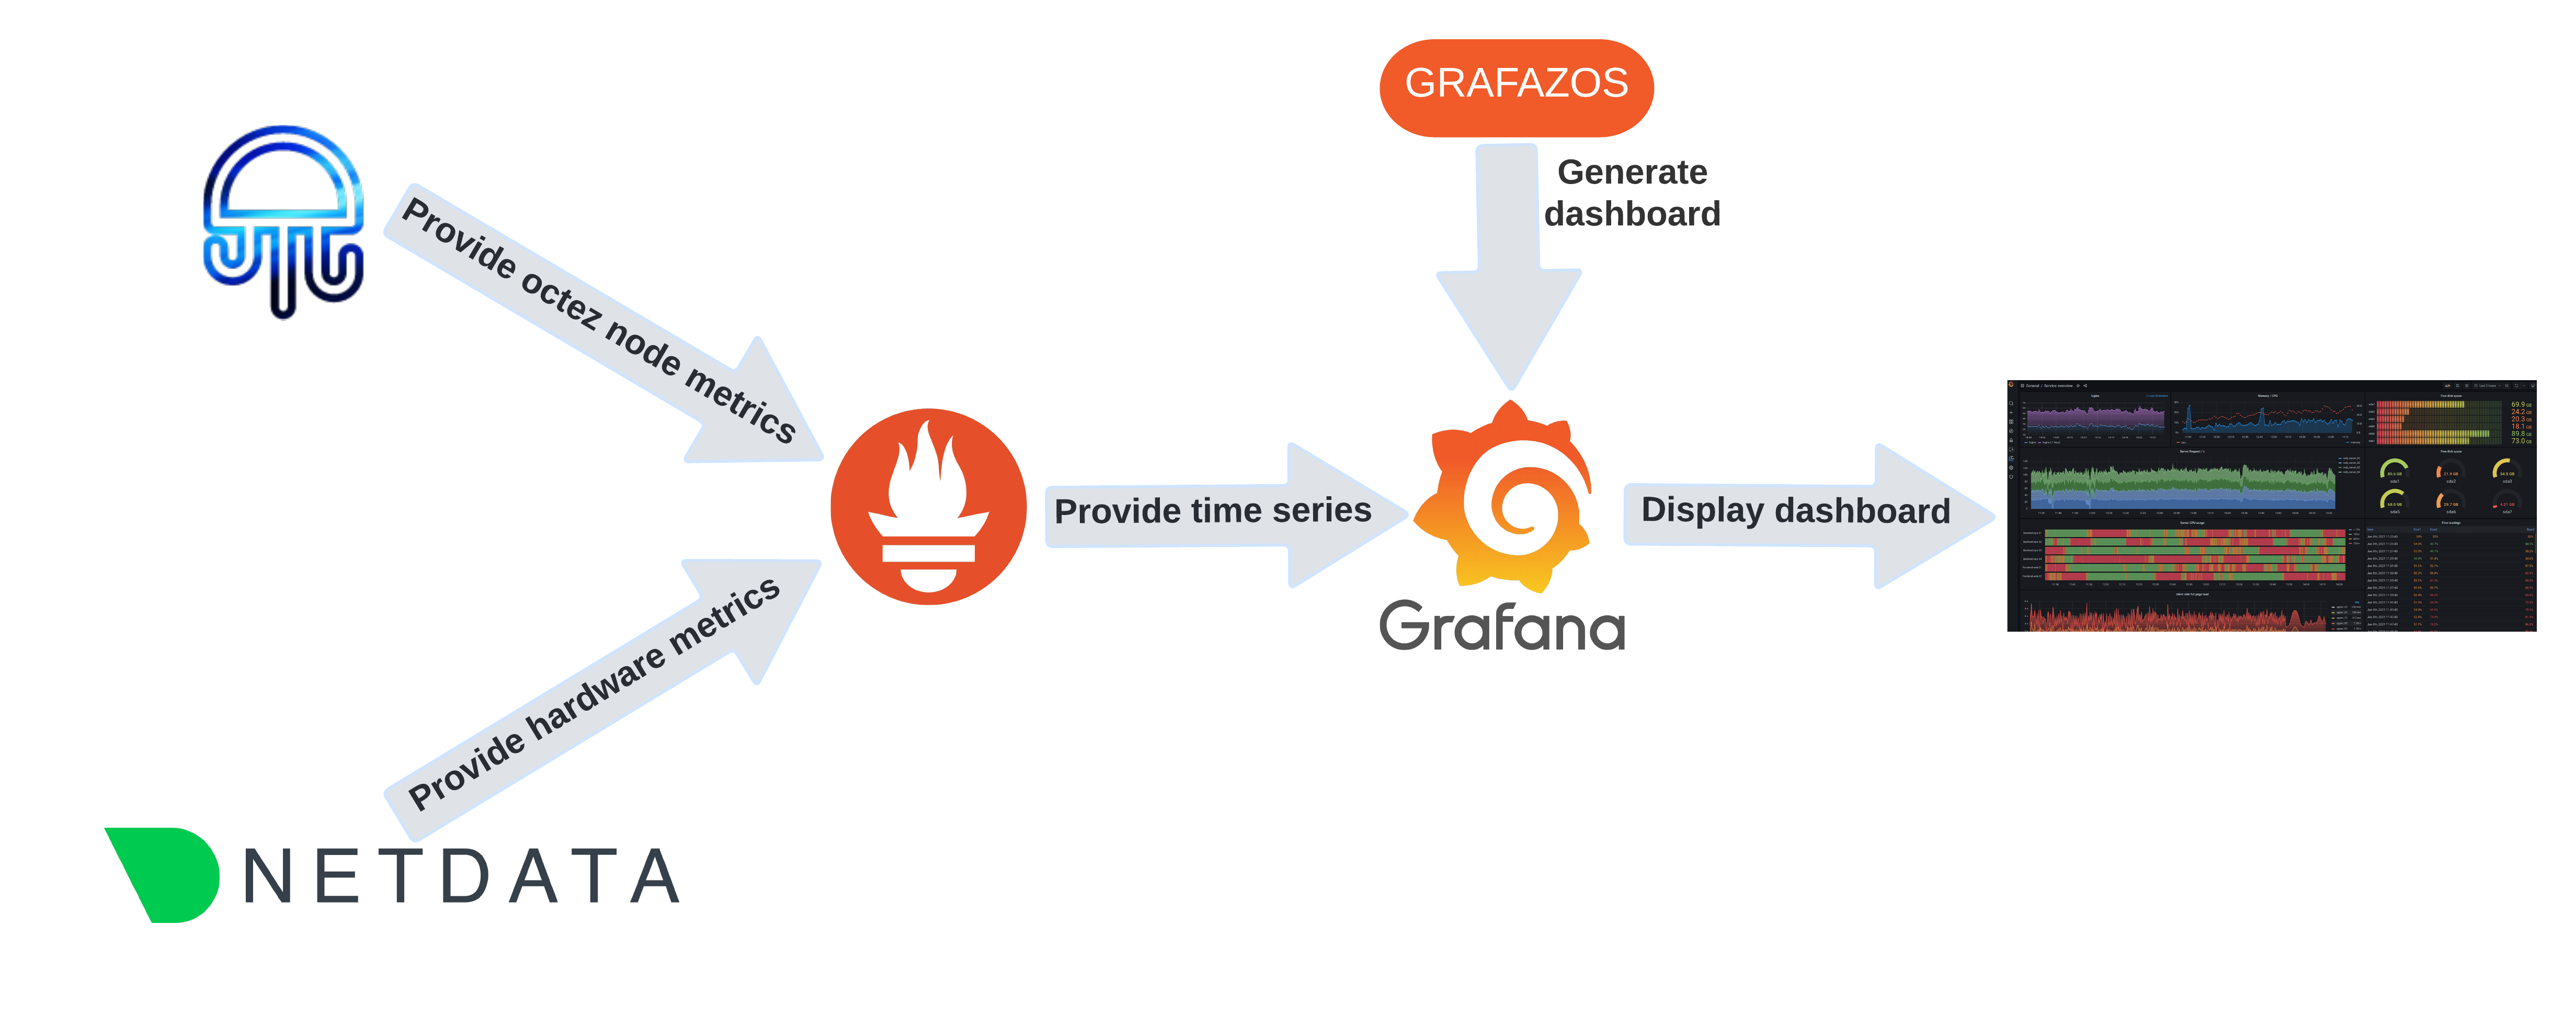 Octez and Netdata provide node and hardware metrics to Prometheus. Prometheus provides time series to Graphana and Graphazos helps generate the dashboard